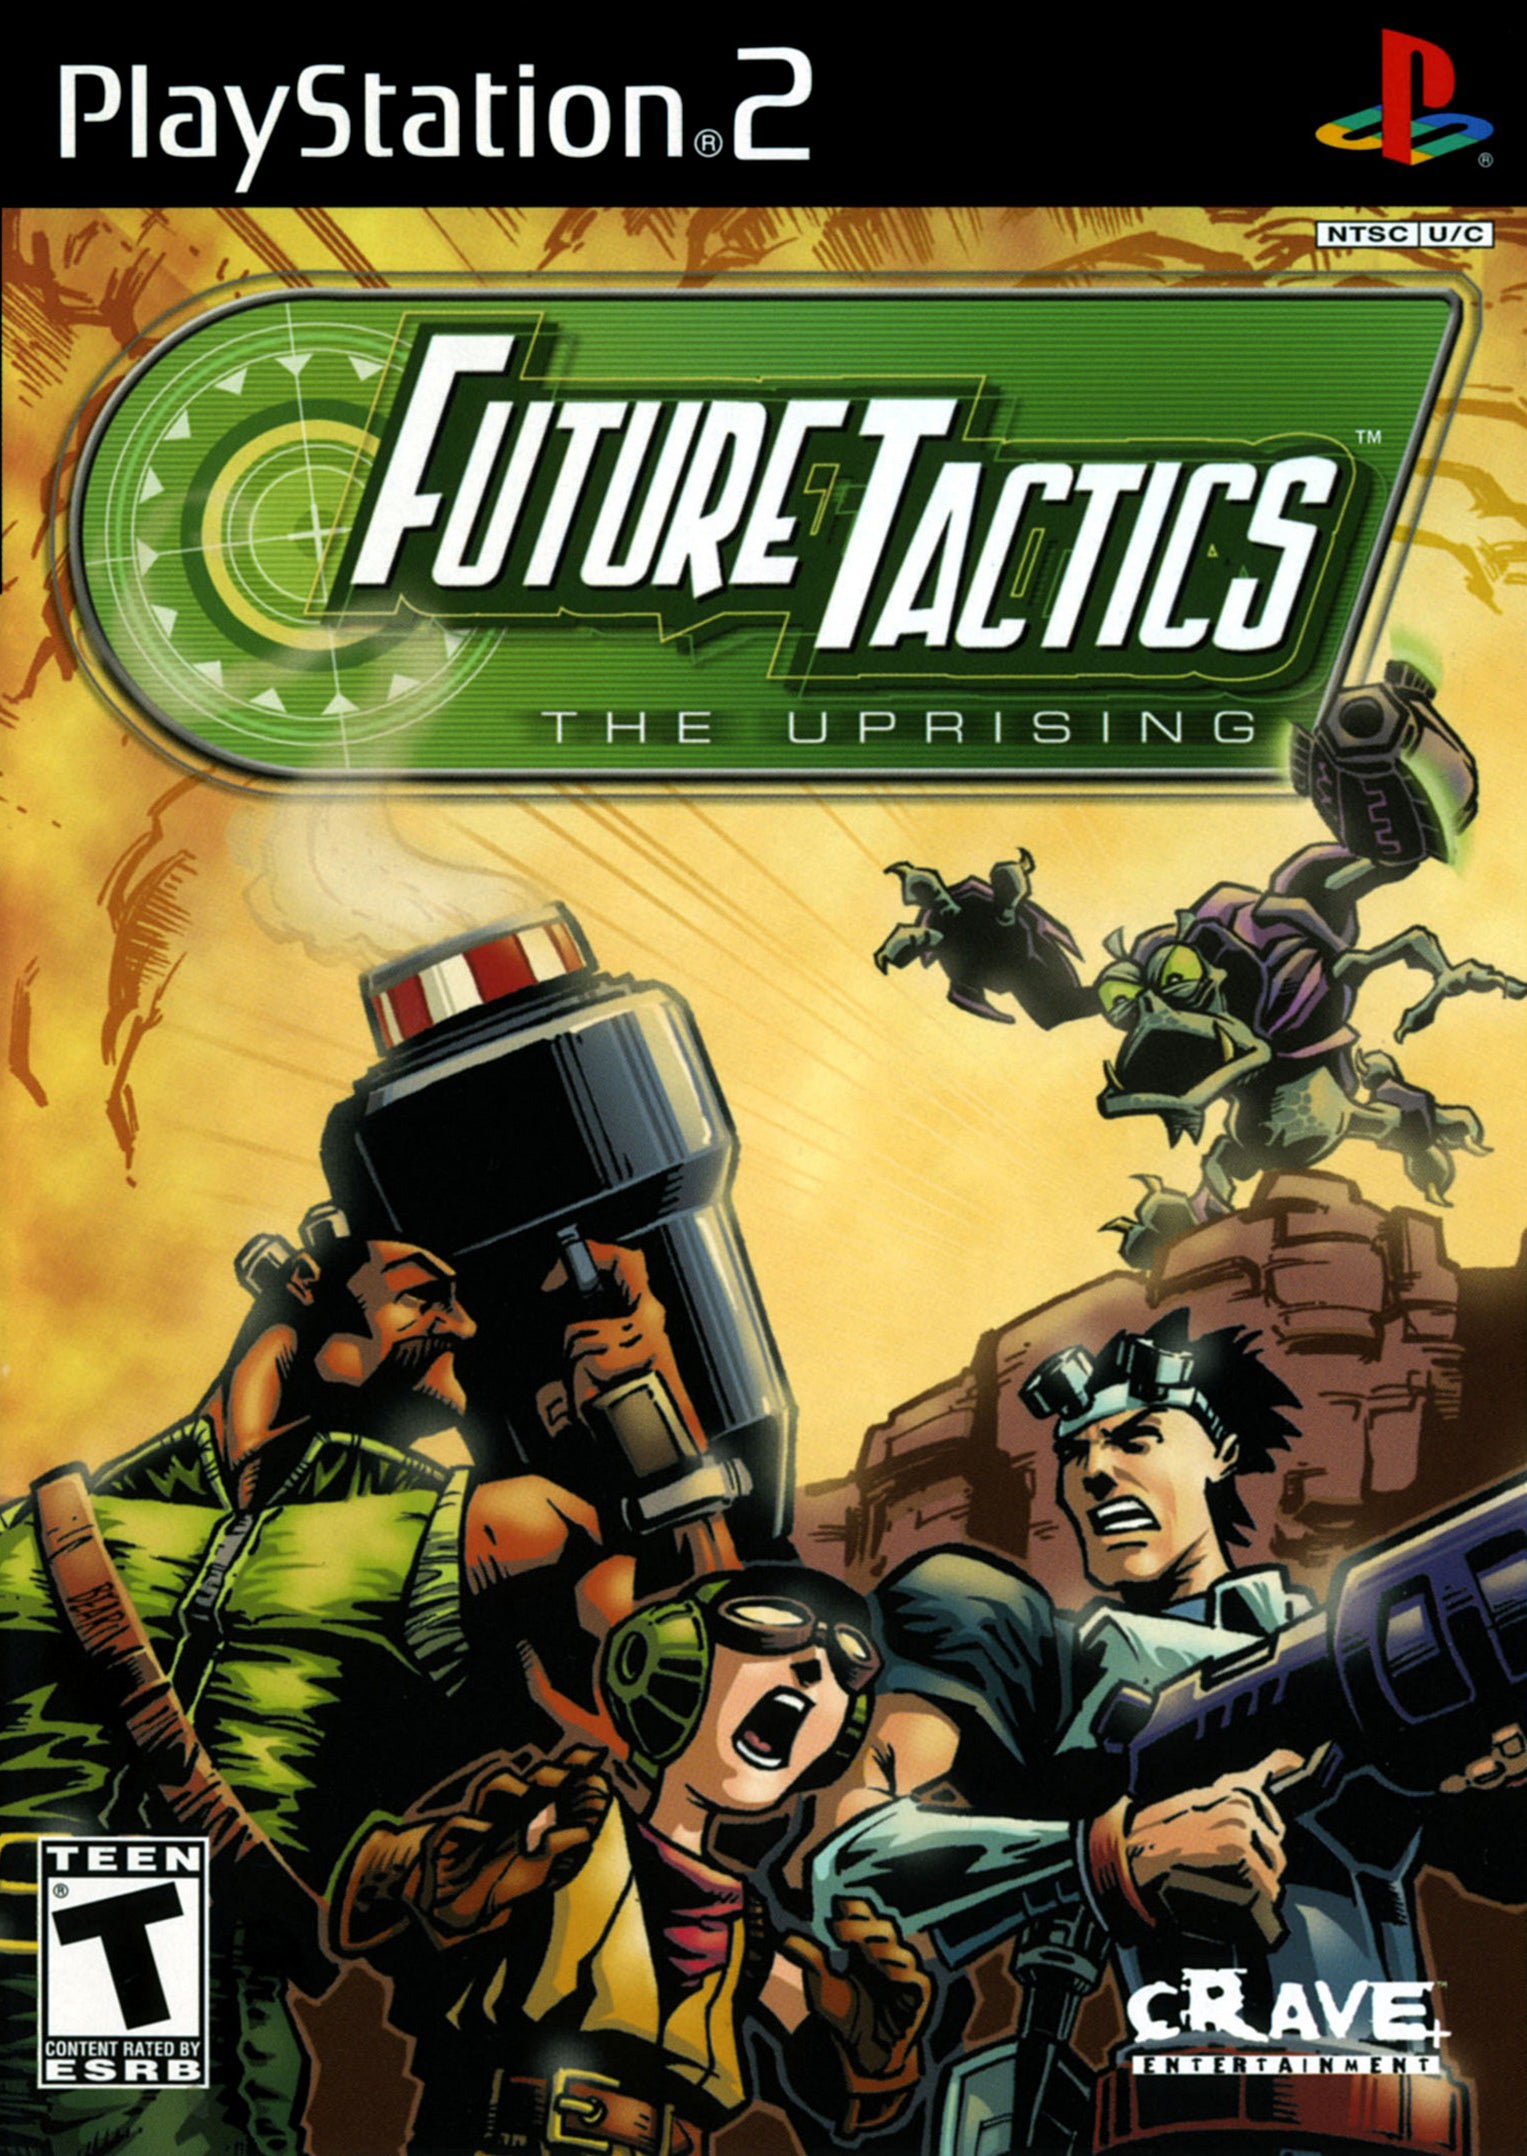 Future Tactics: The Uprising - PlayStation 2 (PS2) Game